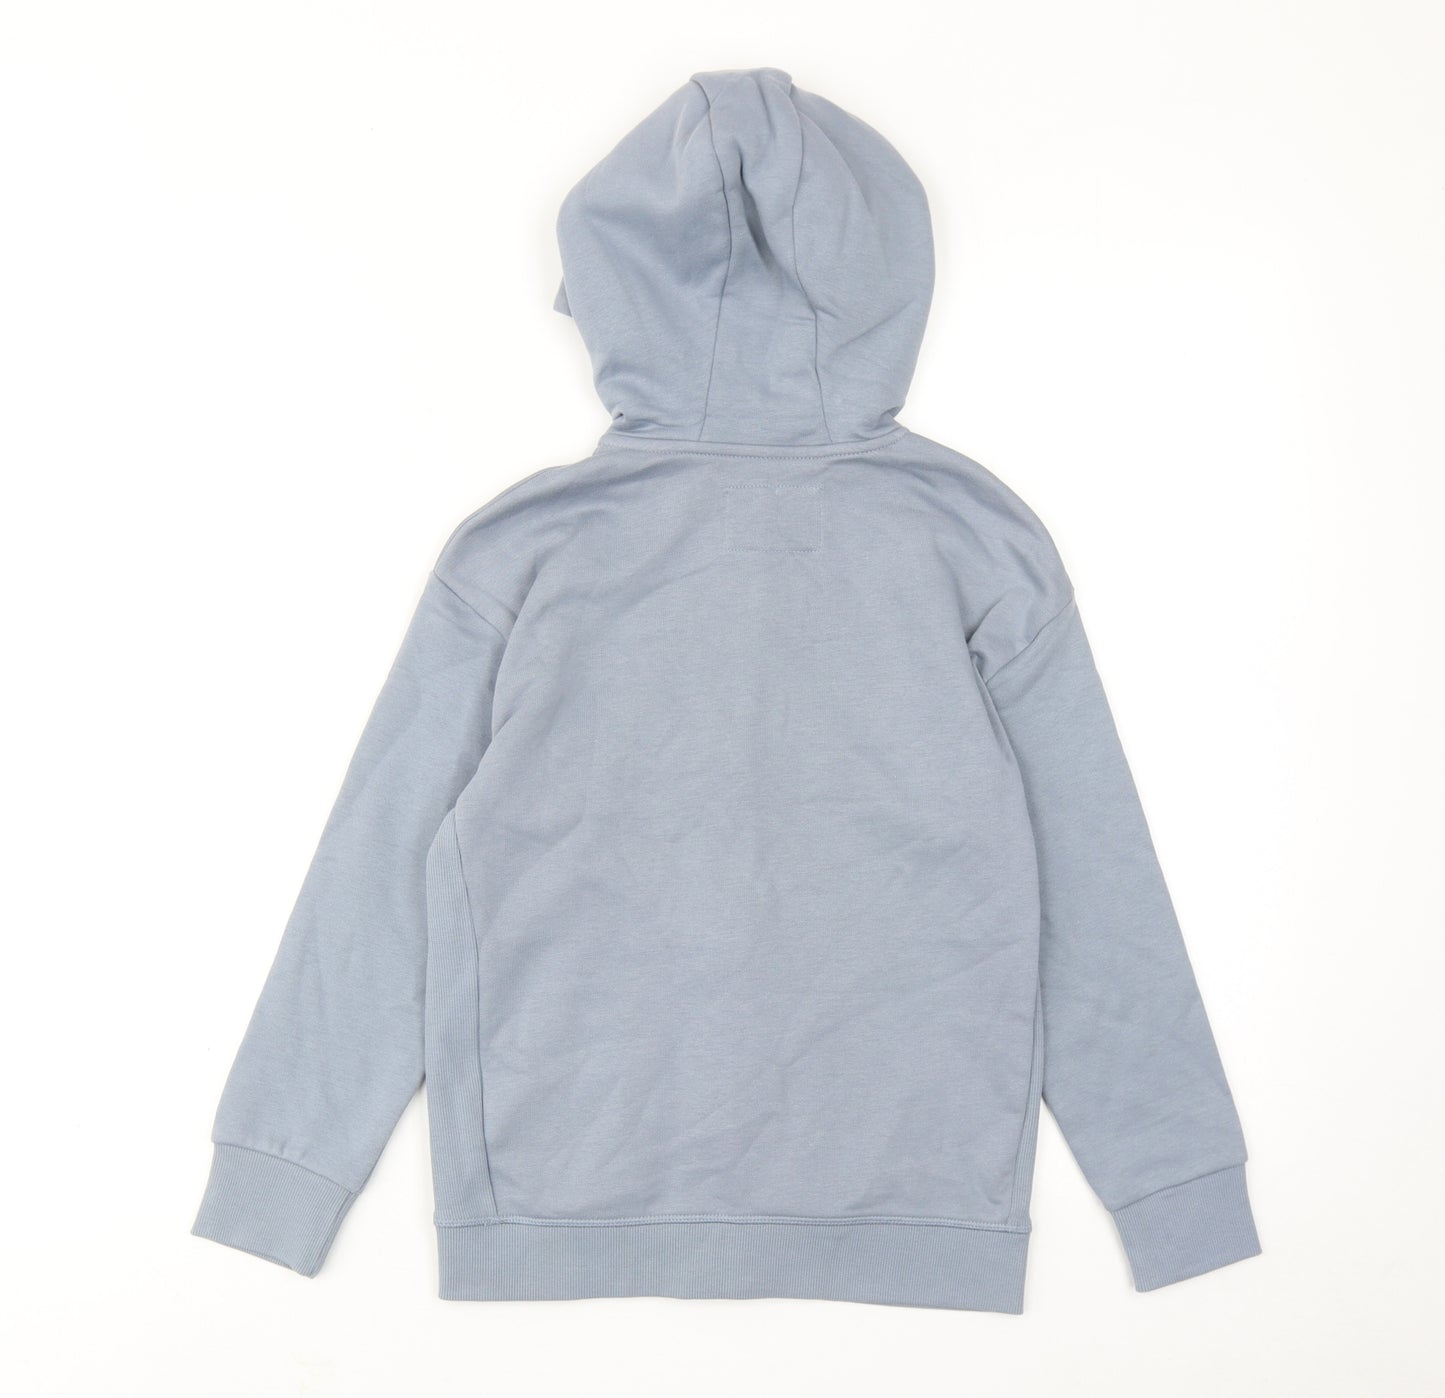 Marks and Spencer Boys Blue Cotton Full Zip Hoodie Size 8-9 Years Zip